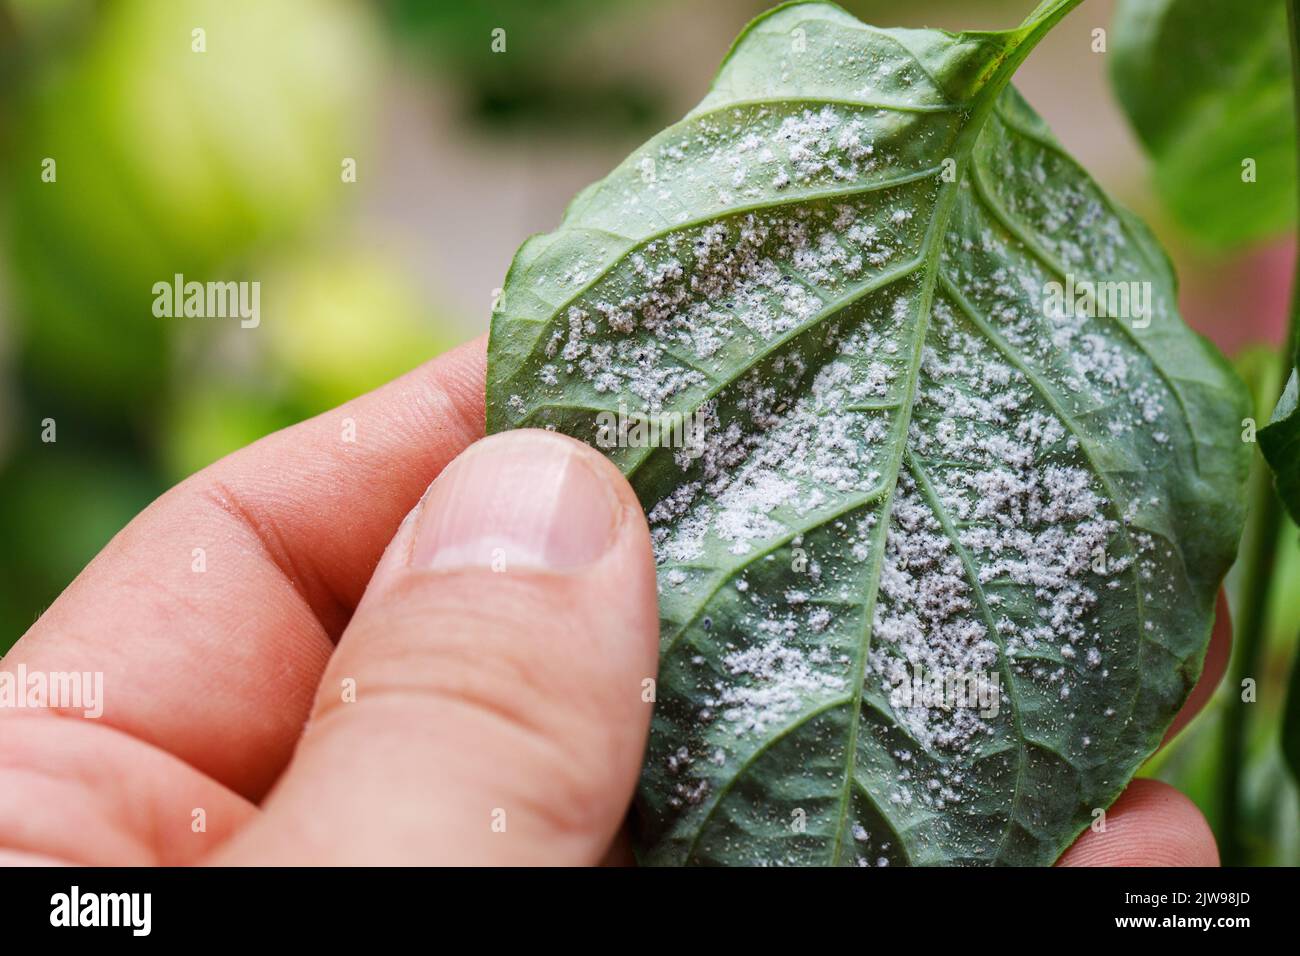 Insect pests, aphid, on the shoots and fruits of plants, Spider mite on flowers. Pepper leaves attacked by malicious insects. Stock Photo